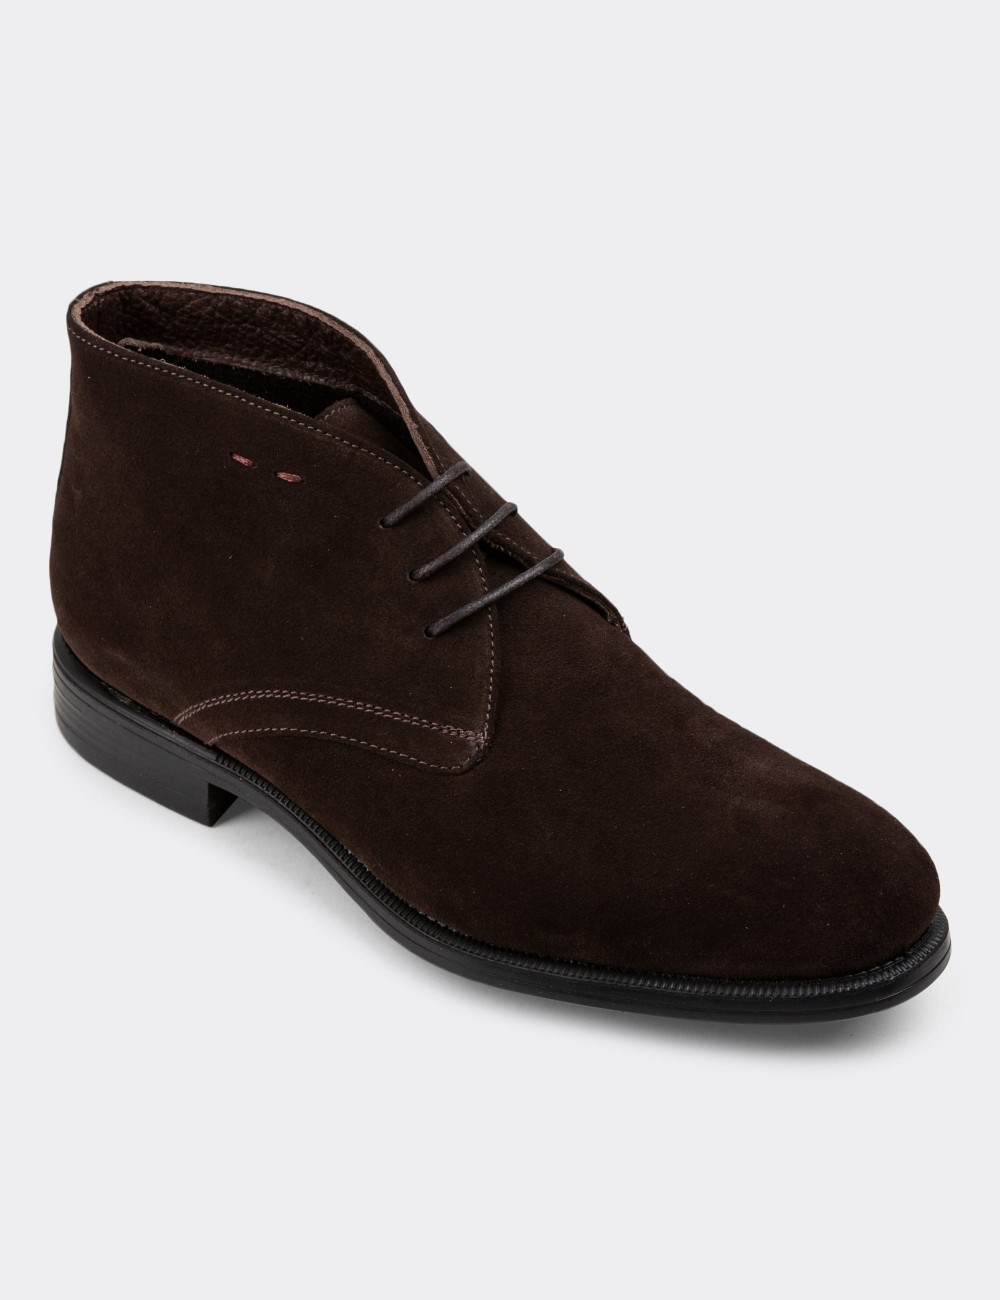 Brown Suede Leather Desert Boots - 01295MKHVC06